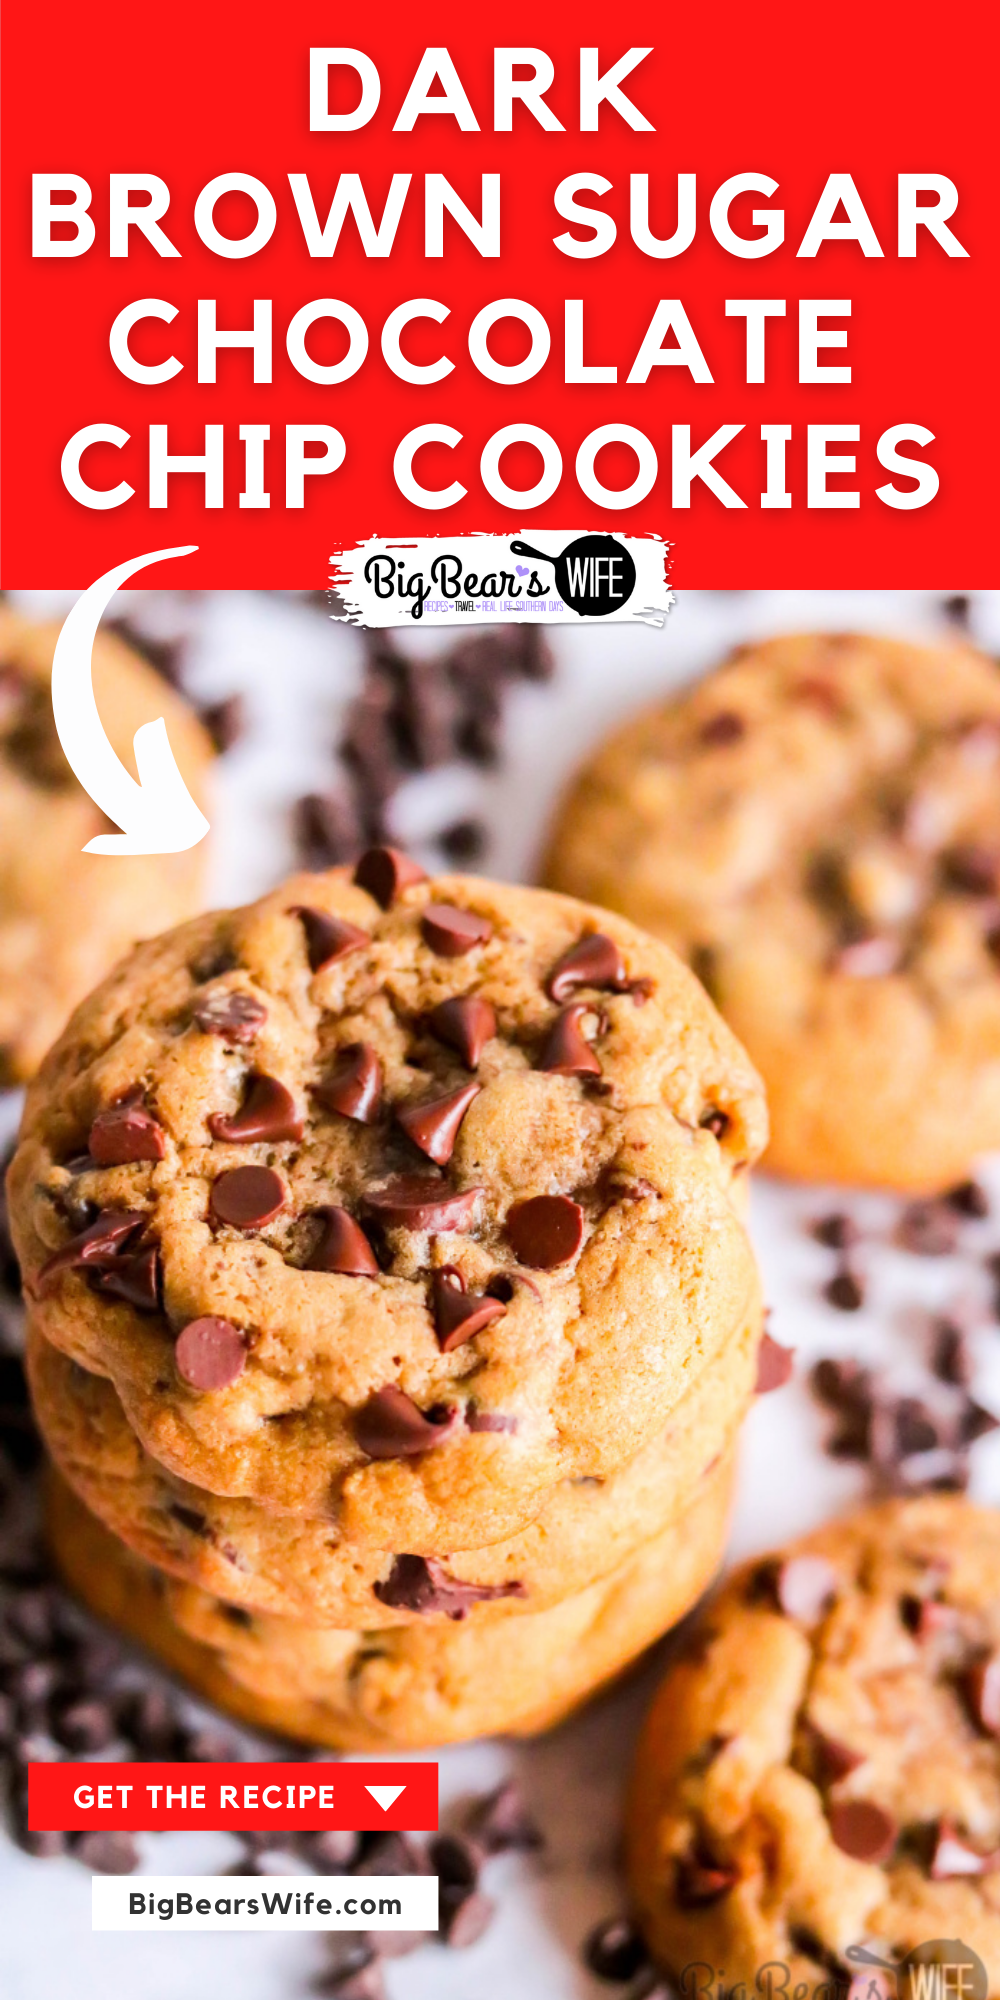 These Dark Brown Sugar Chocolate Chip Cookies might be the best chocolate chip cookie ever. Chilling the dough gives the cookie a soft and chewy texture and they’re packed tons of chocolate chips!  via @bigbearswife